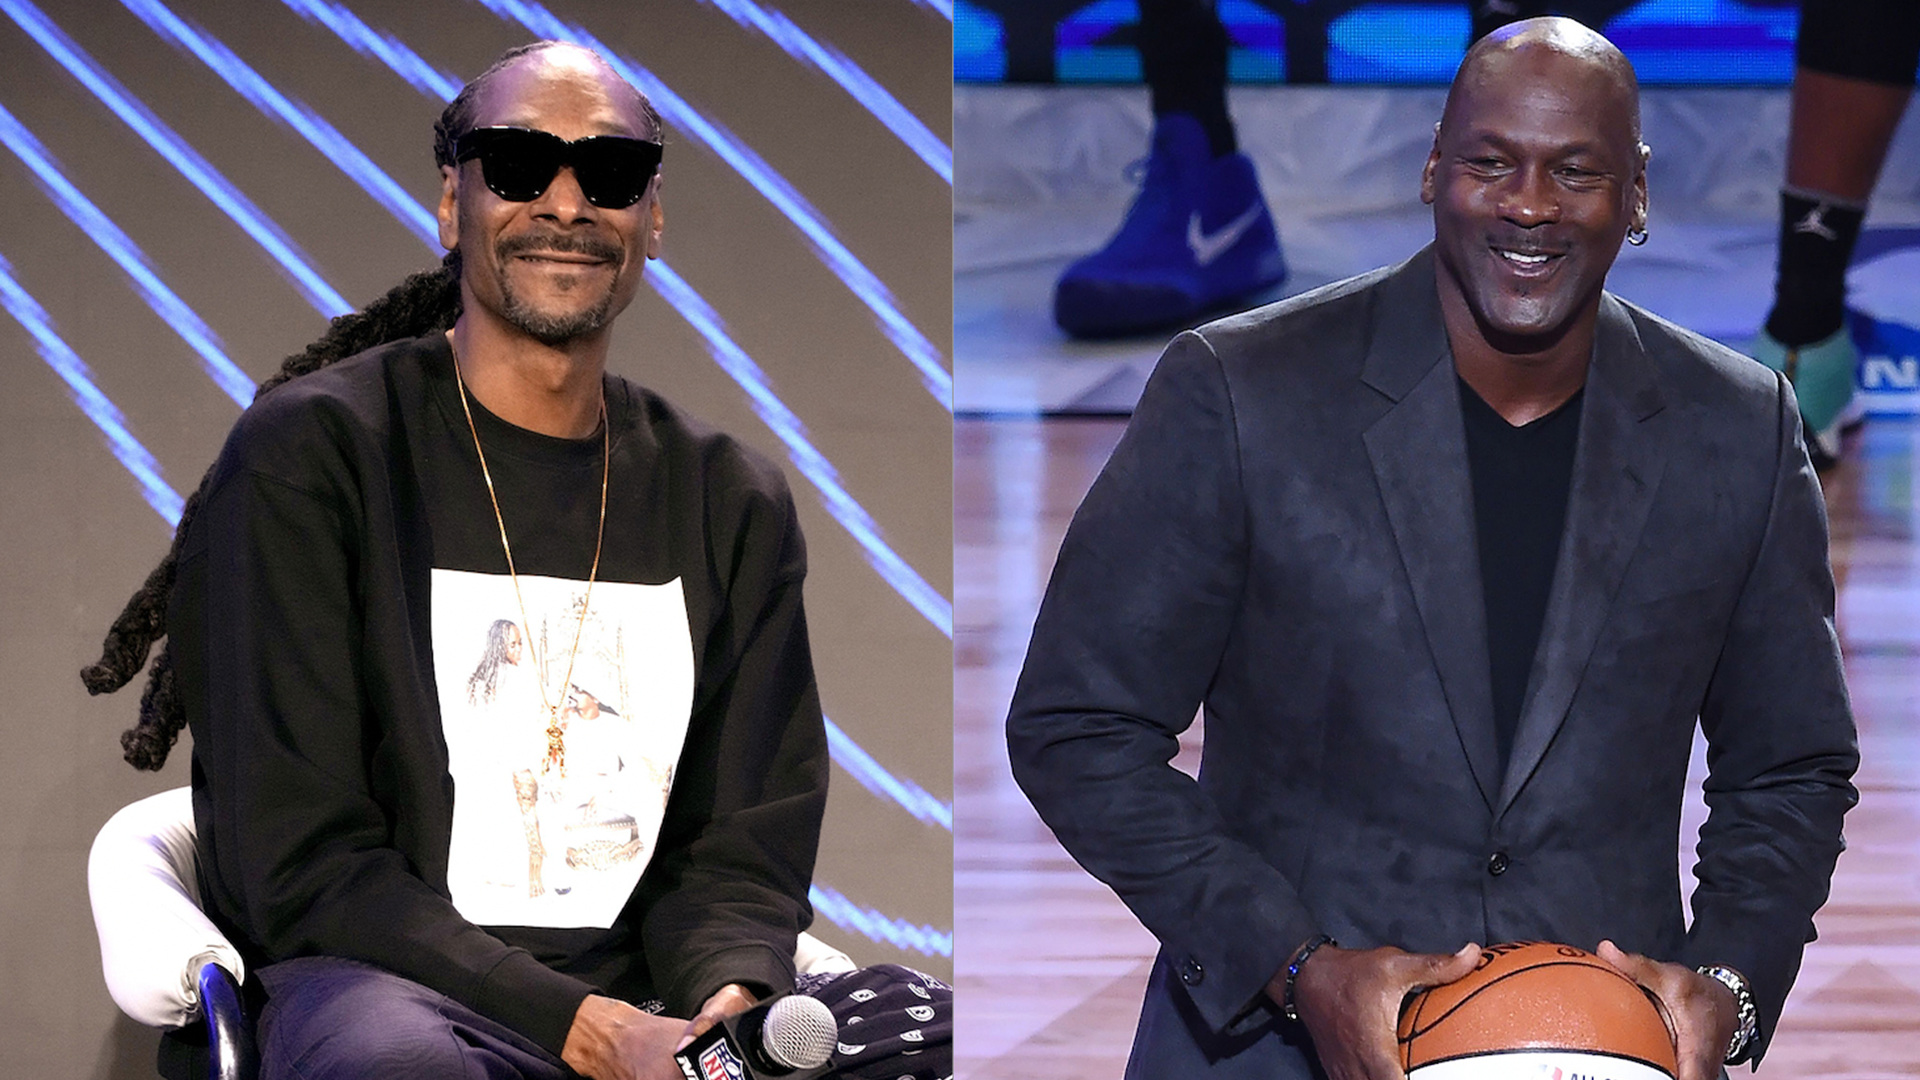 'One Of The Craziest Deals' Snoop Dogg Has Ever Turned Down Involves $2M And Michael Jordan